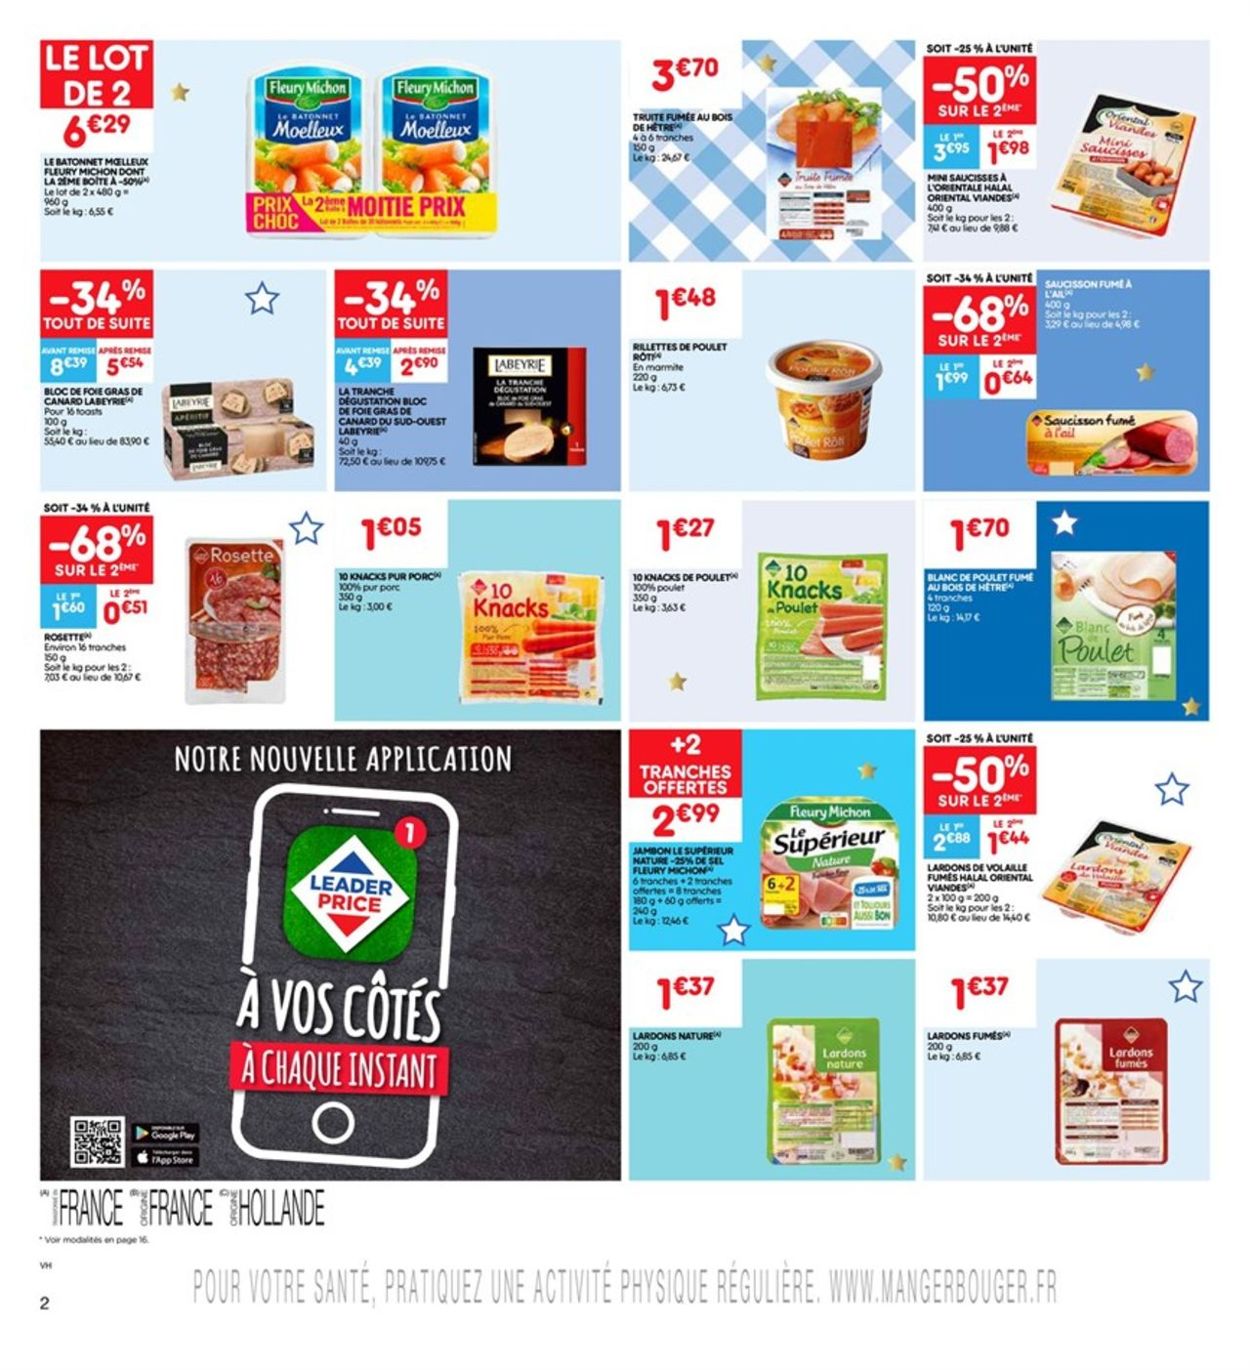 Leader Price Catalogue - 18.06-30.06.2019 (Page 2)